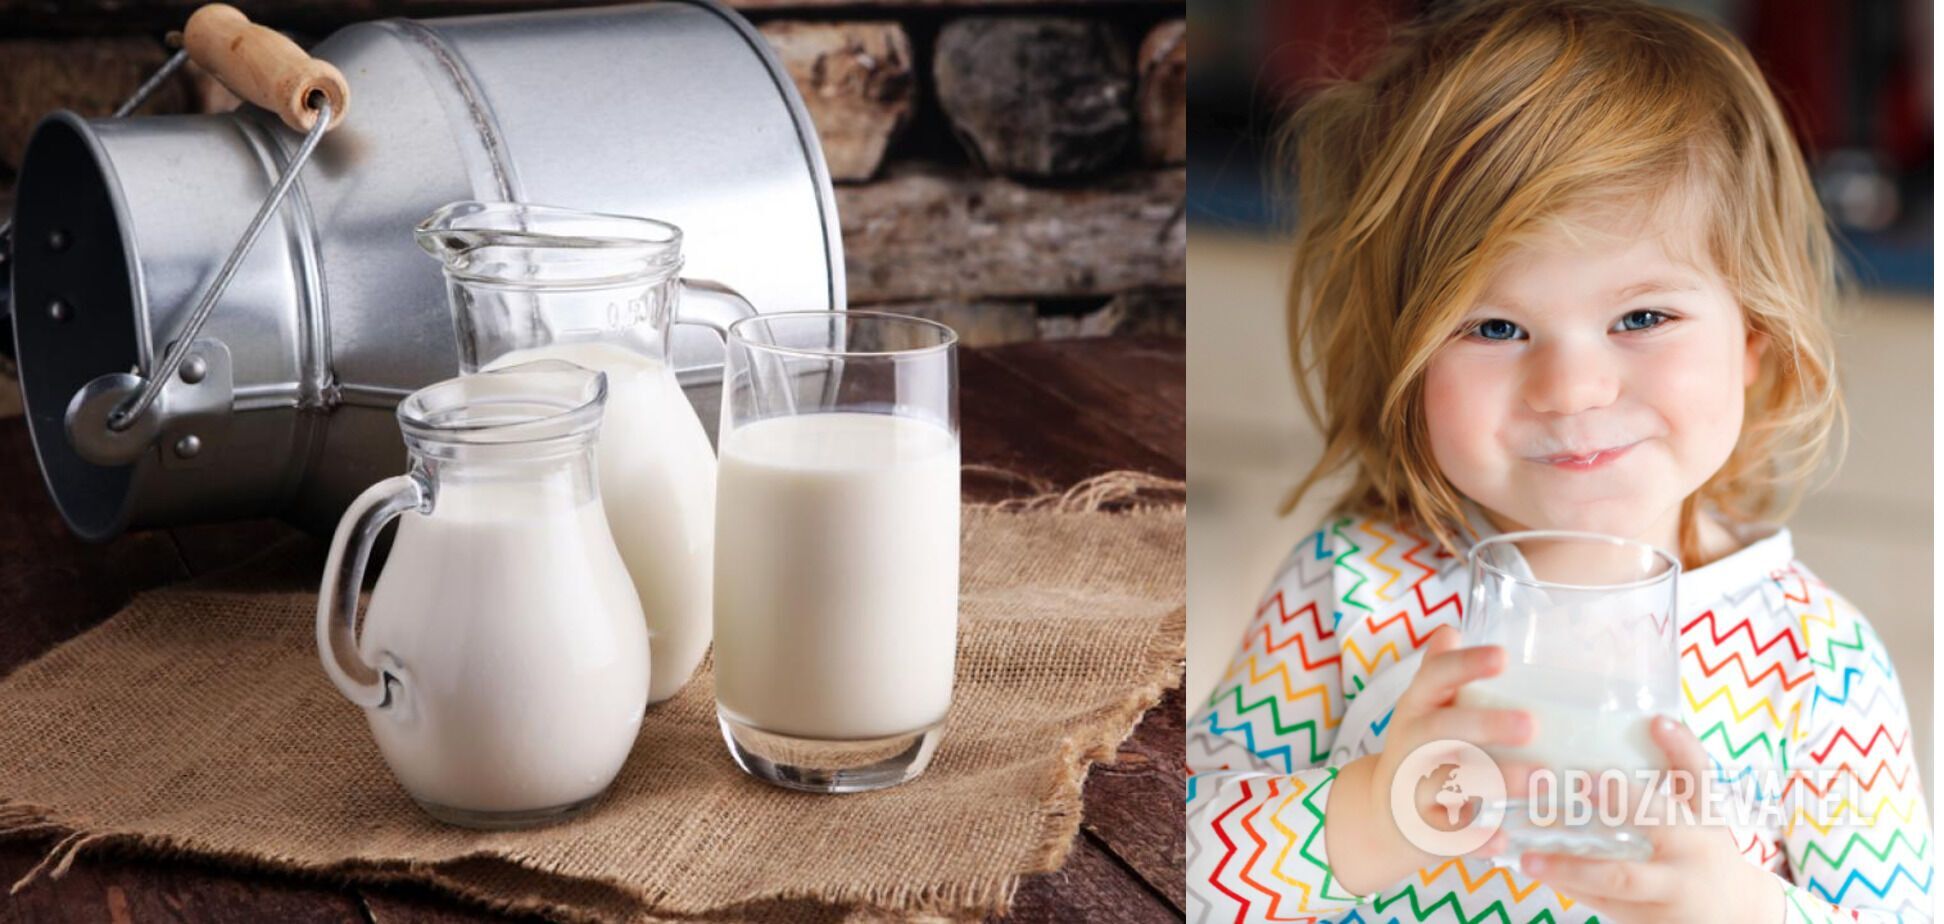 Scientists are confident that those who did not accept milk before will now be able to drink it A2